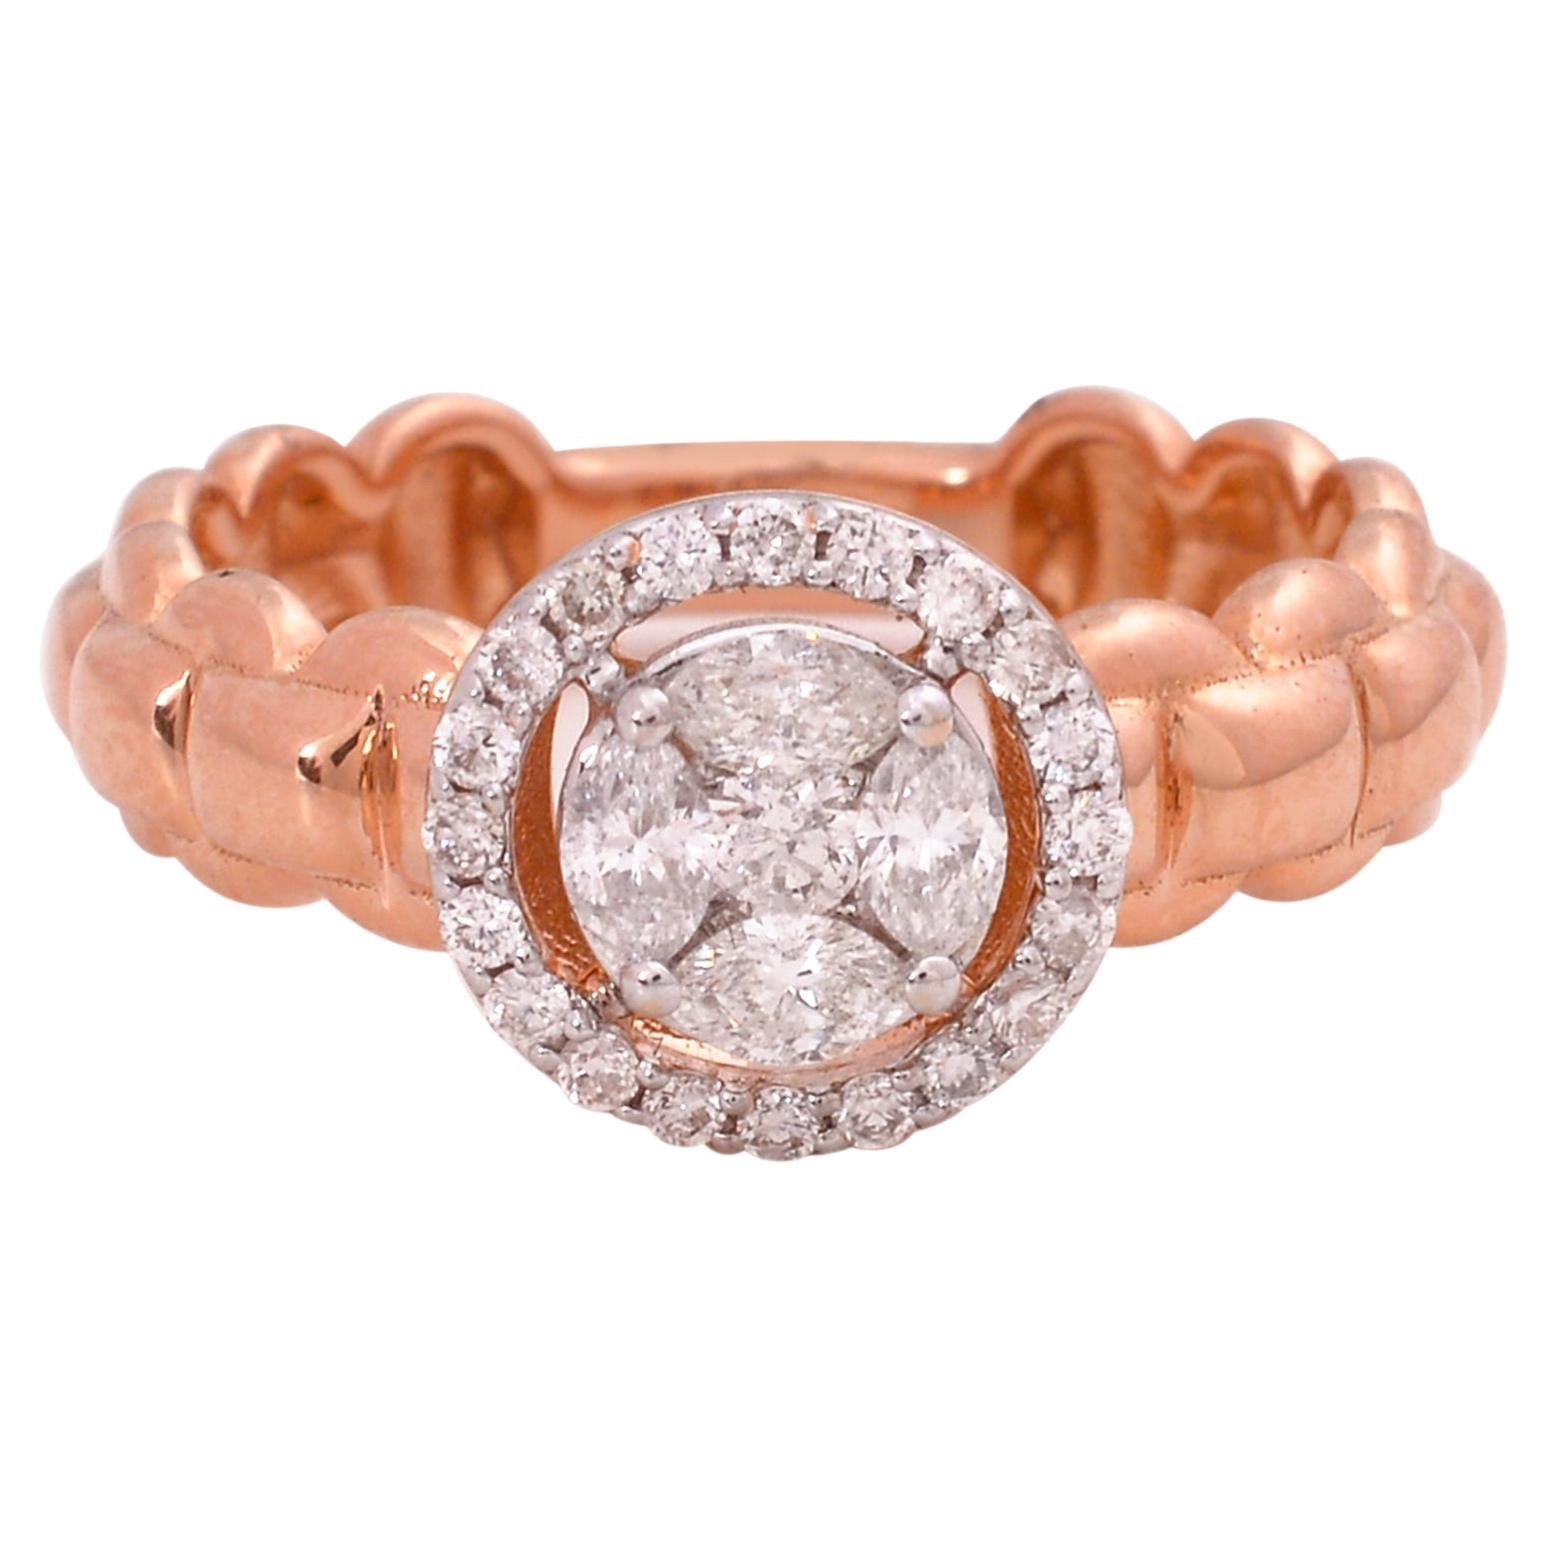 SI Clarity HI Color Marquise Round Diamond Band Ring 18 Karat Rose Gold Jewelry